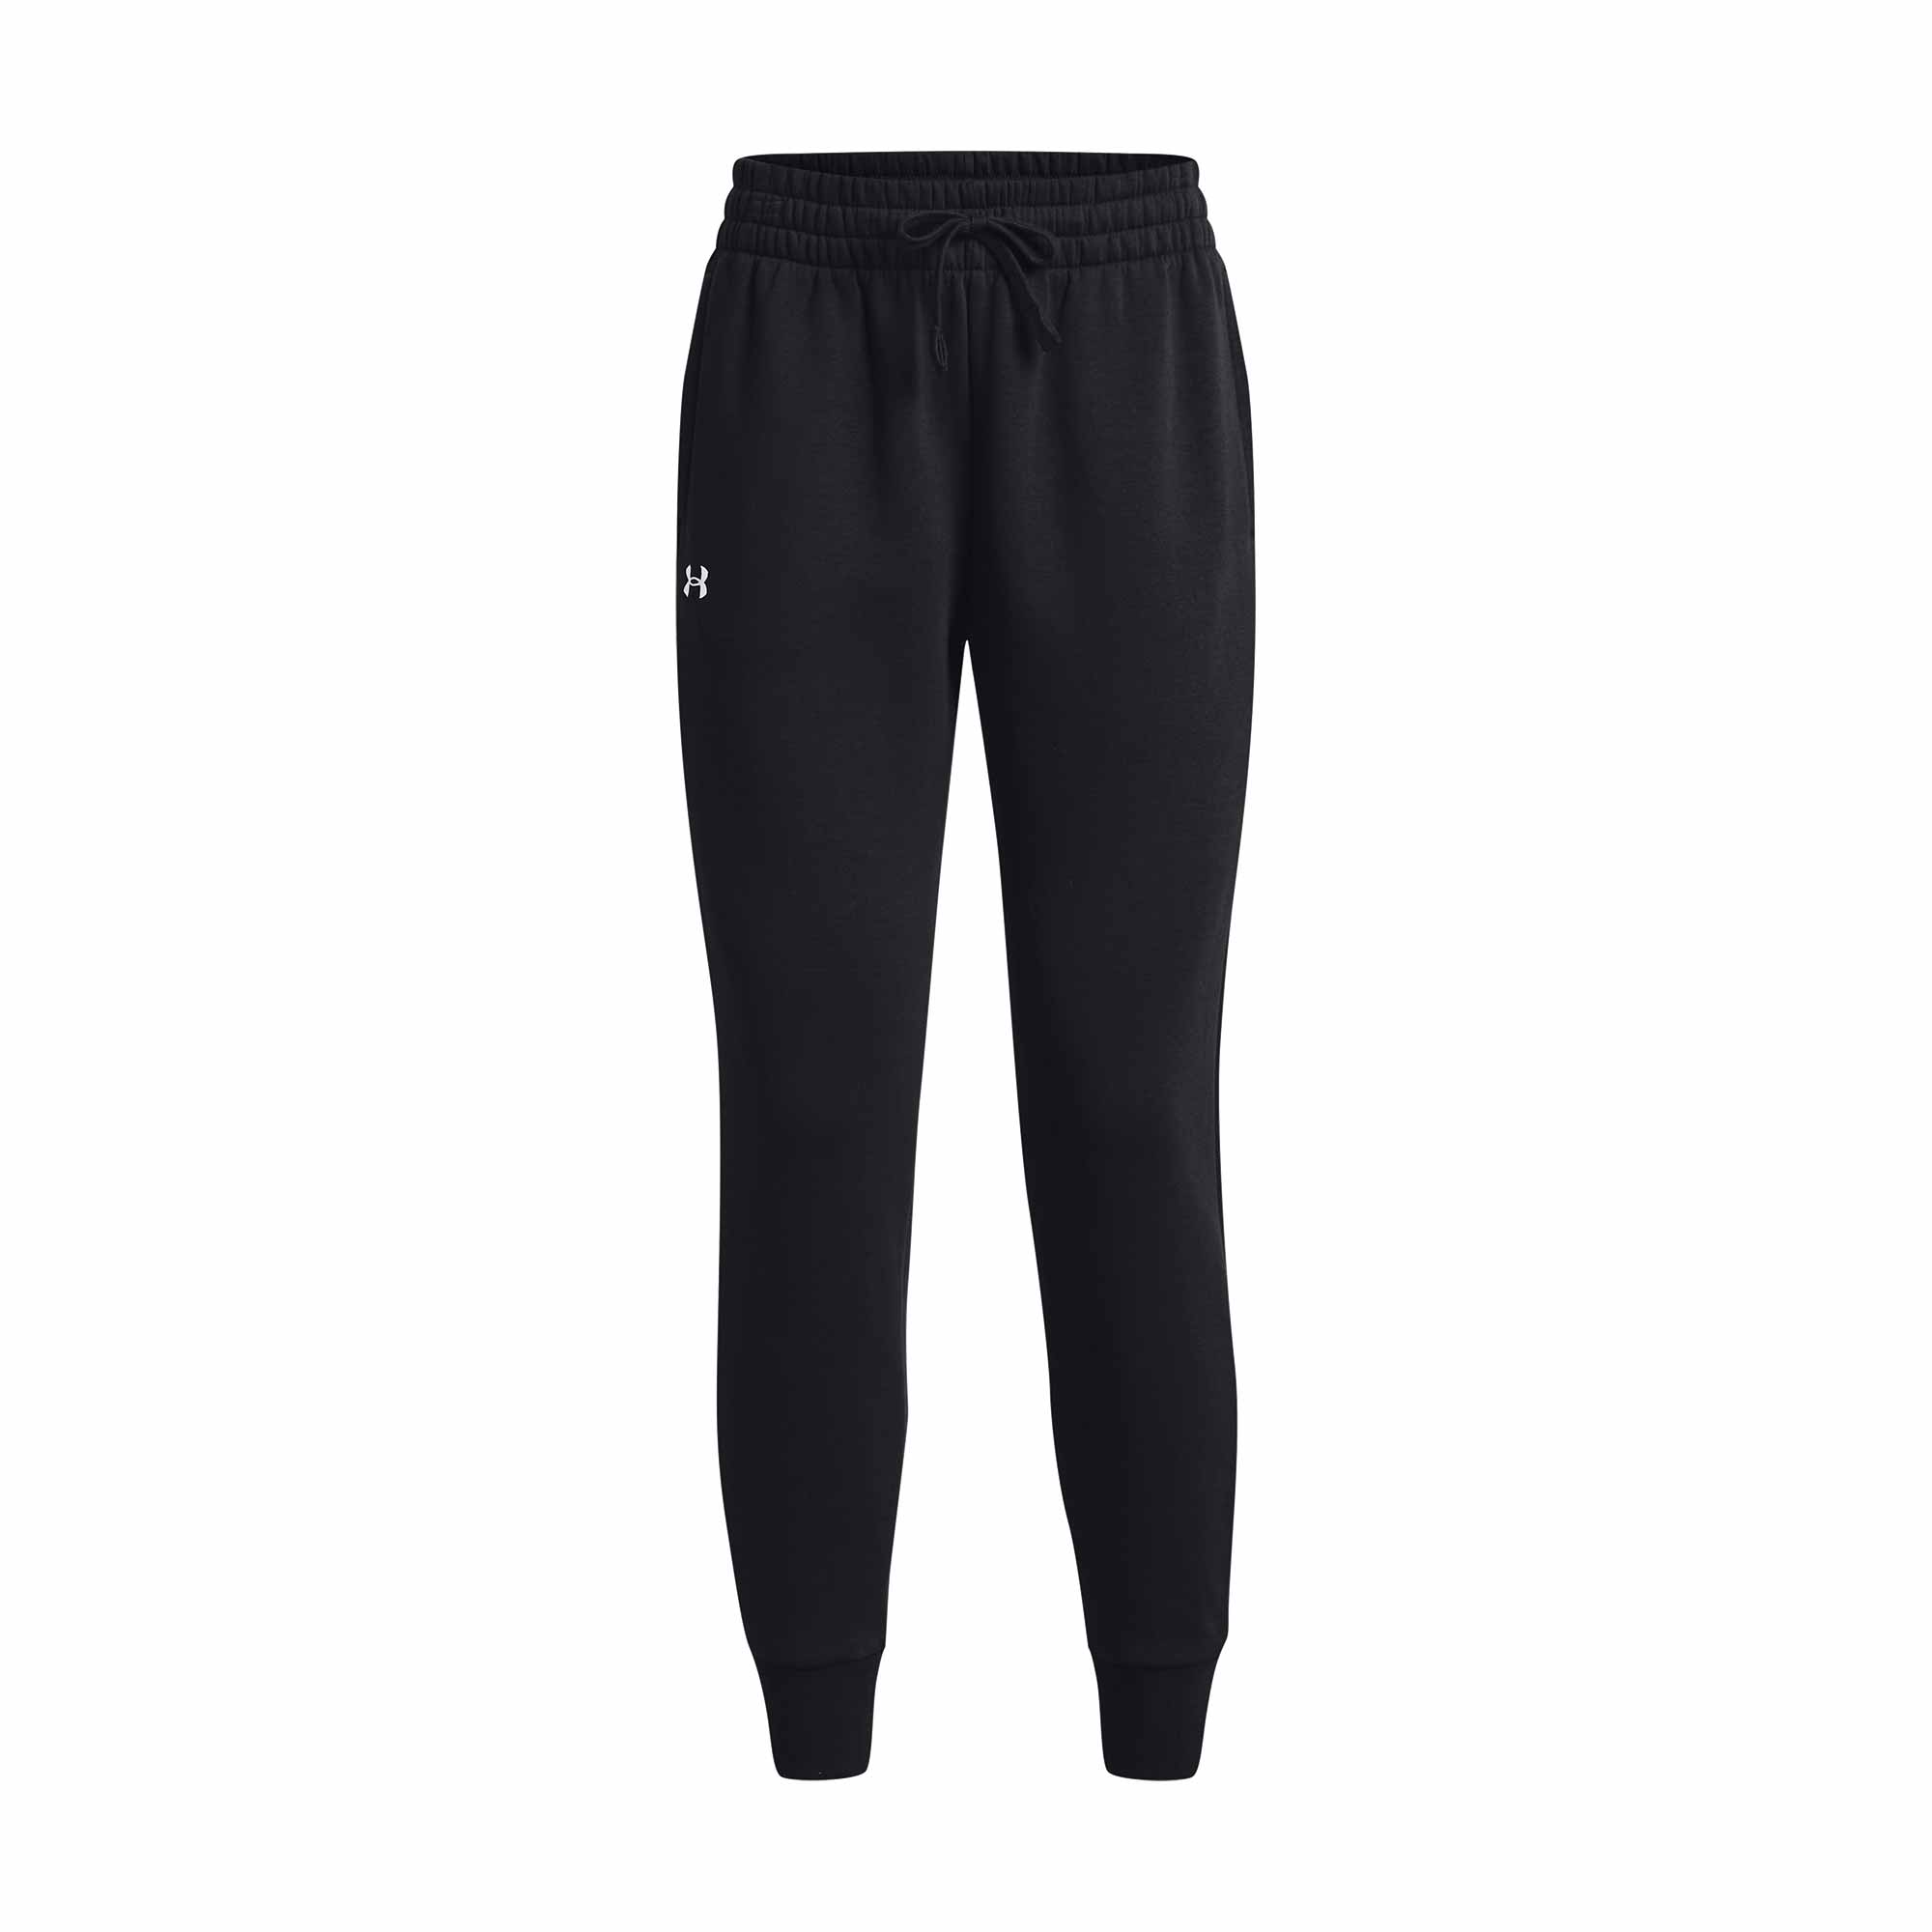 Under Armour, Pants & Jumpsuits, Under Armour Womens Fly Fast 2 Mesh 78 Leggings  Small